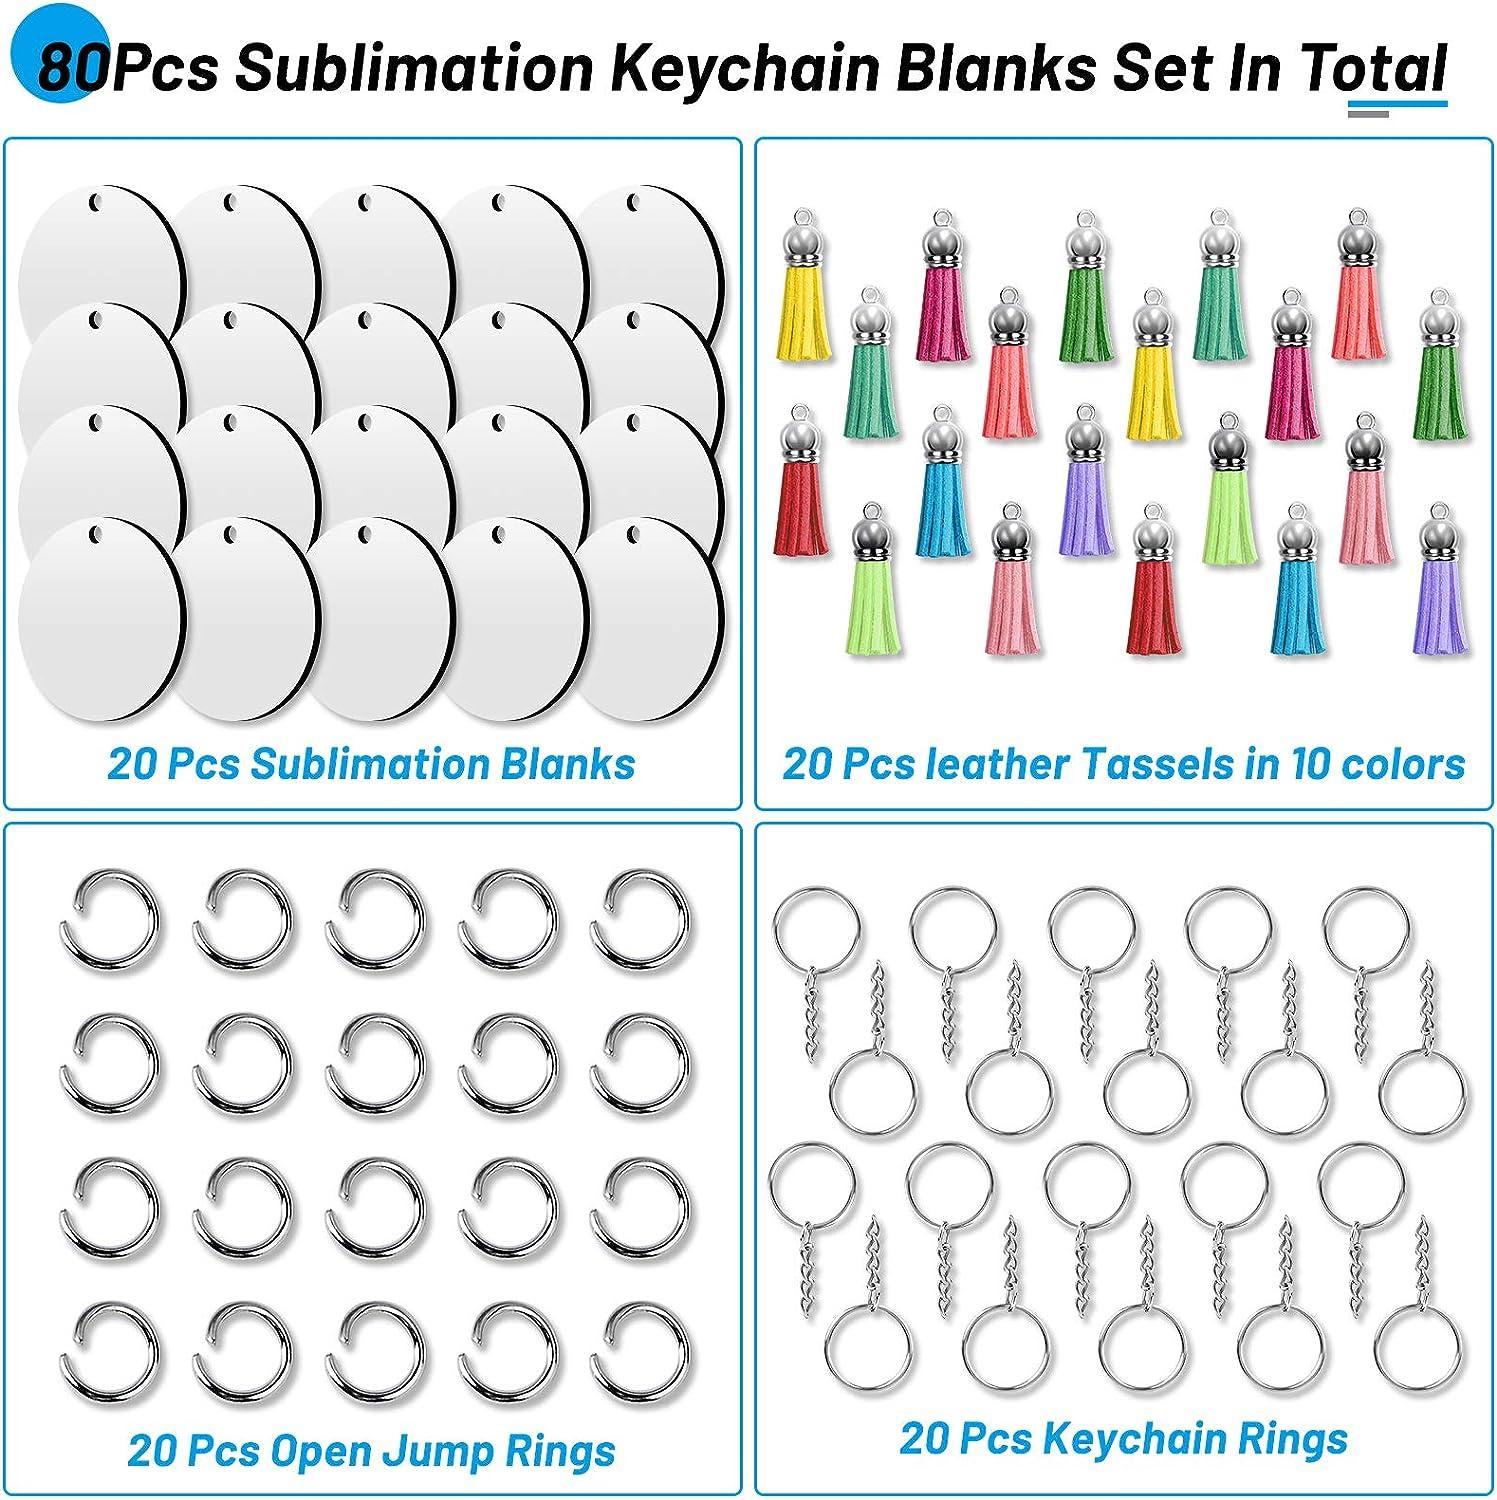 Sublimation Blanks Keychains Products 80 PCS Keychains Tag Bulk